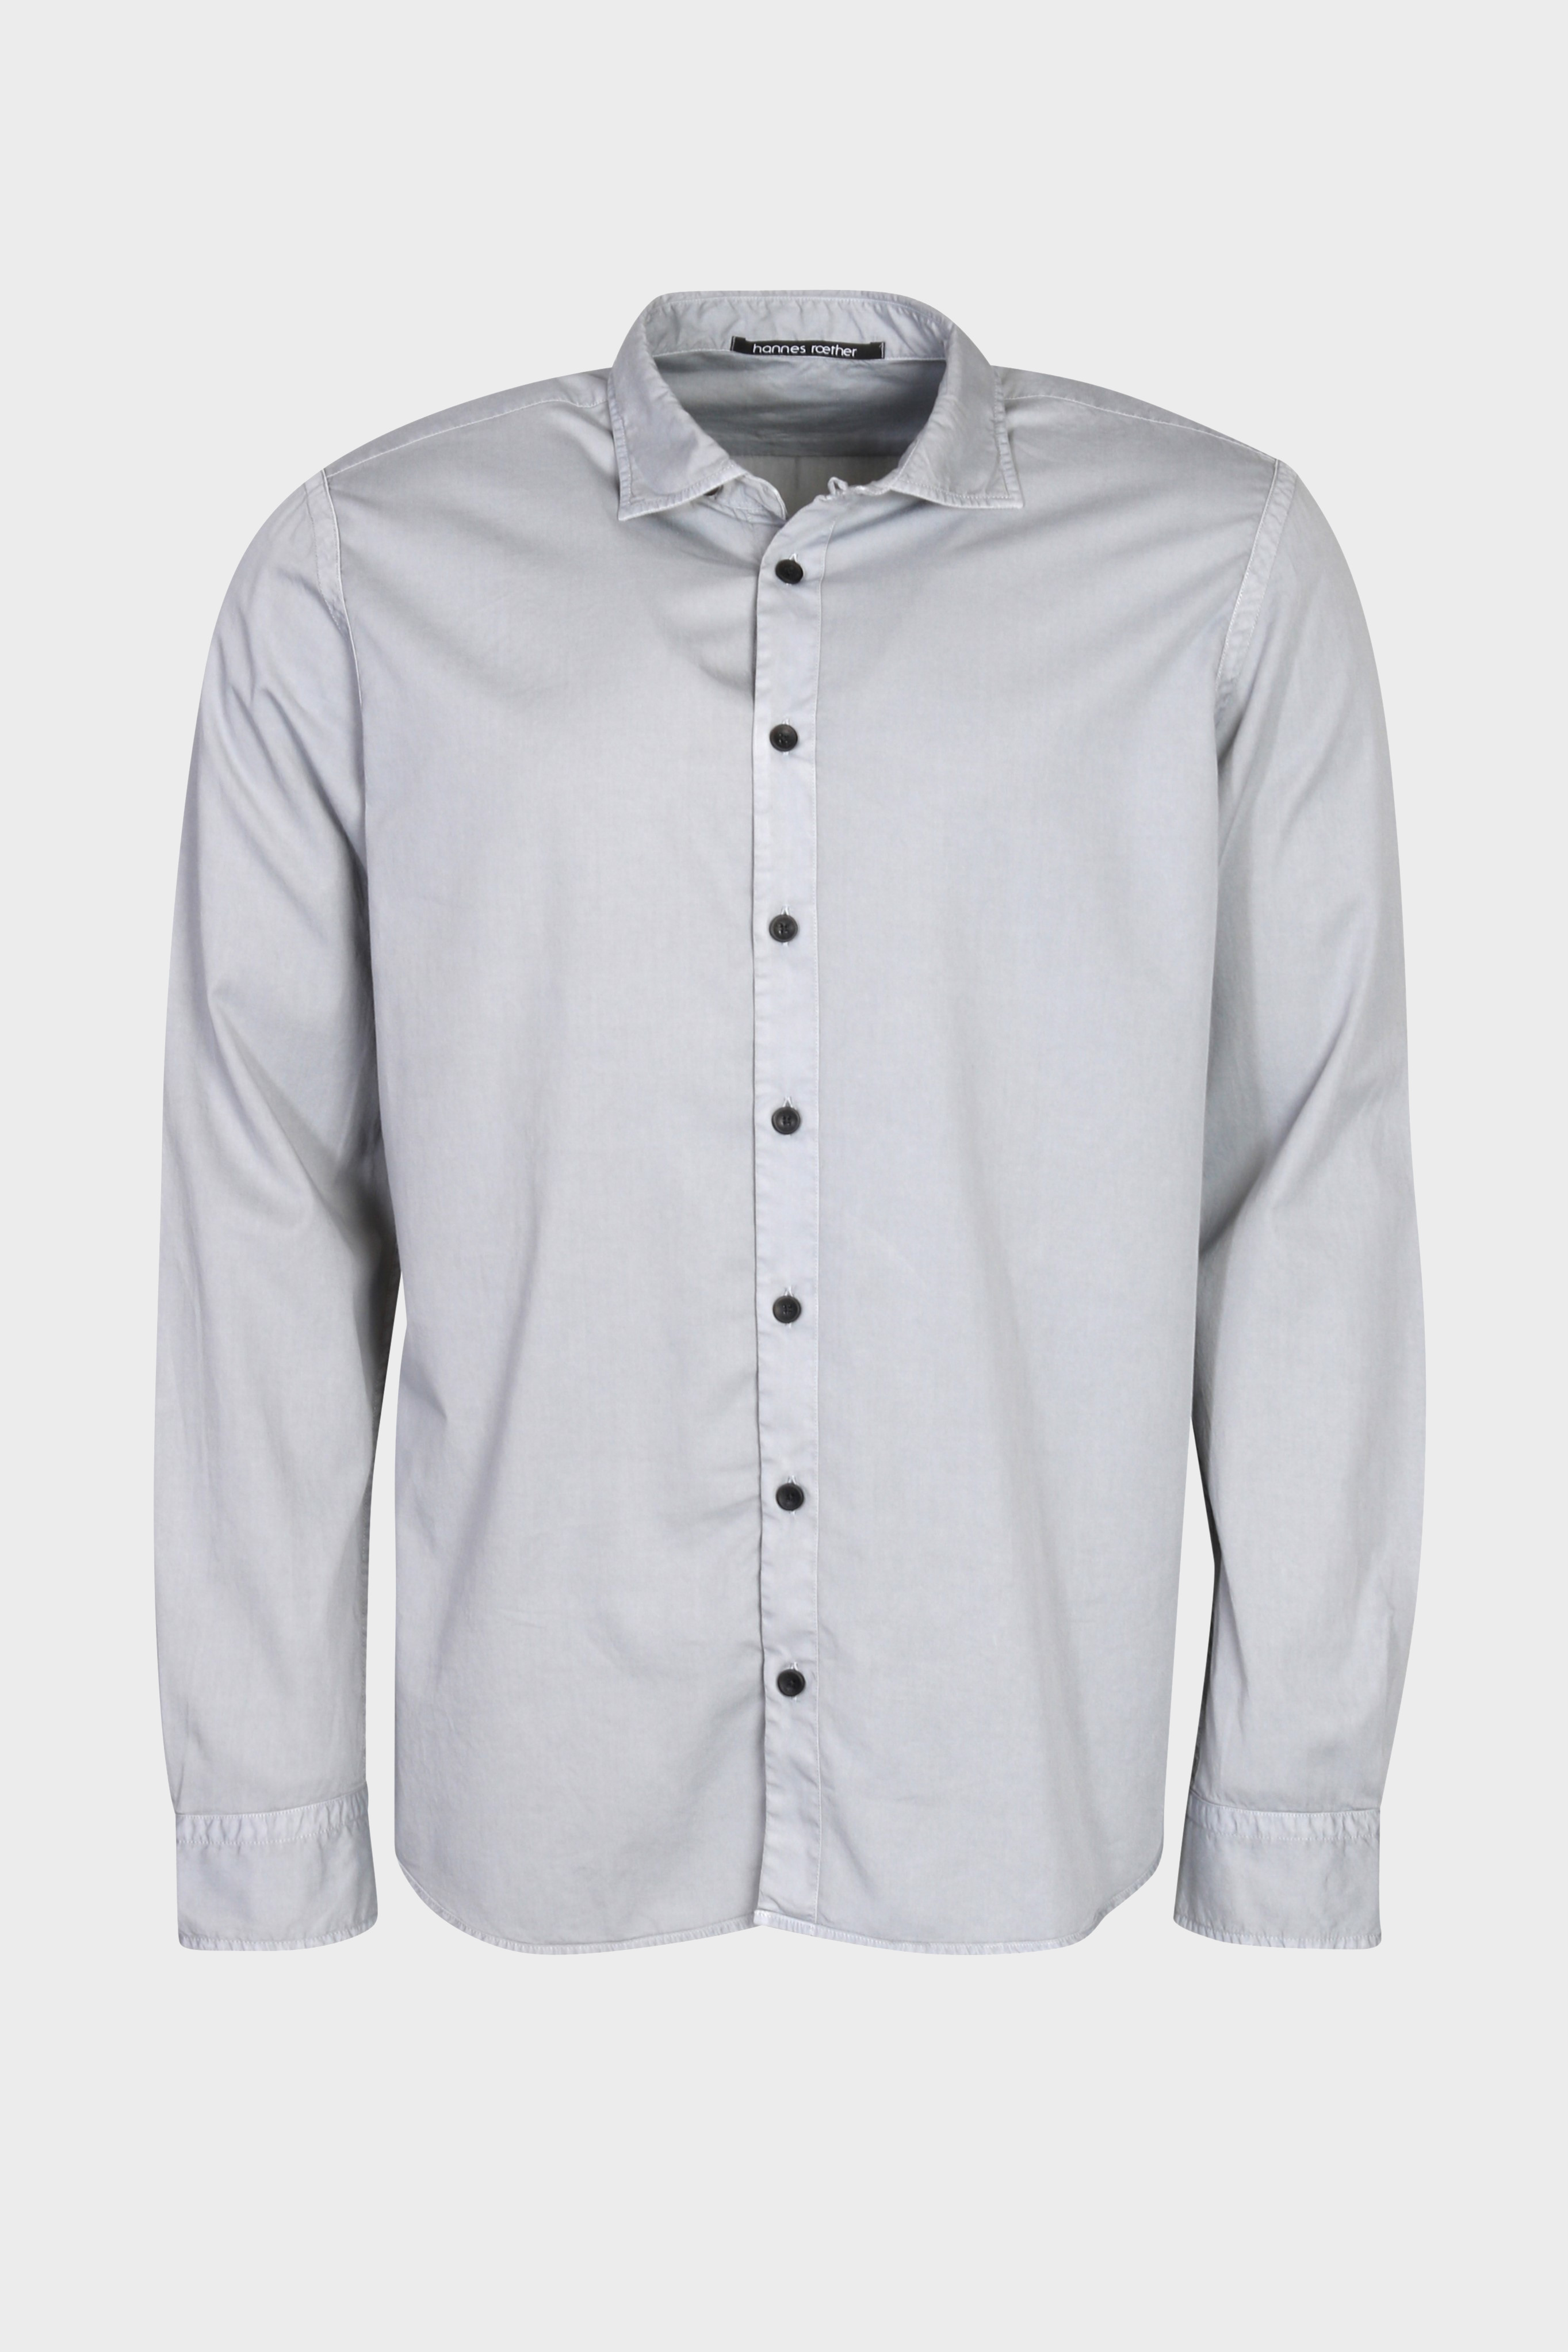 HANNES ROETHER Cotton Shirt in Light Grey 3XL